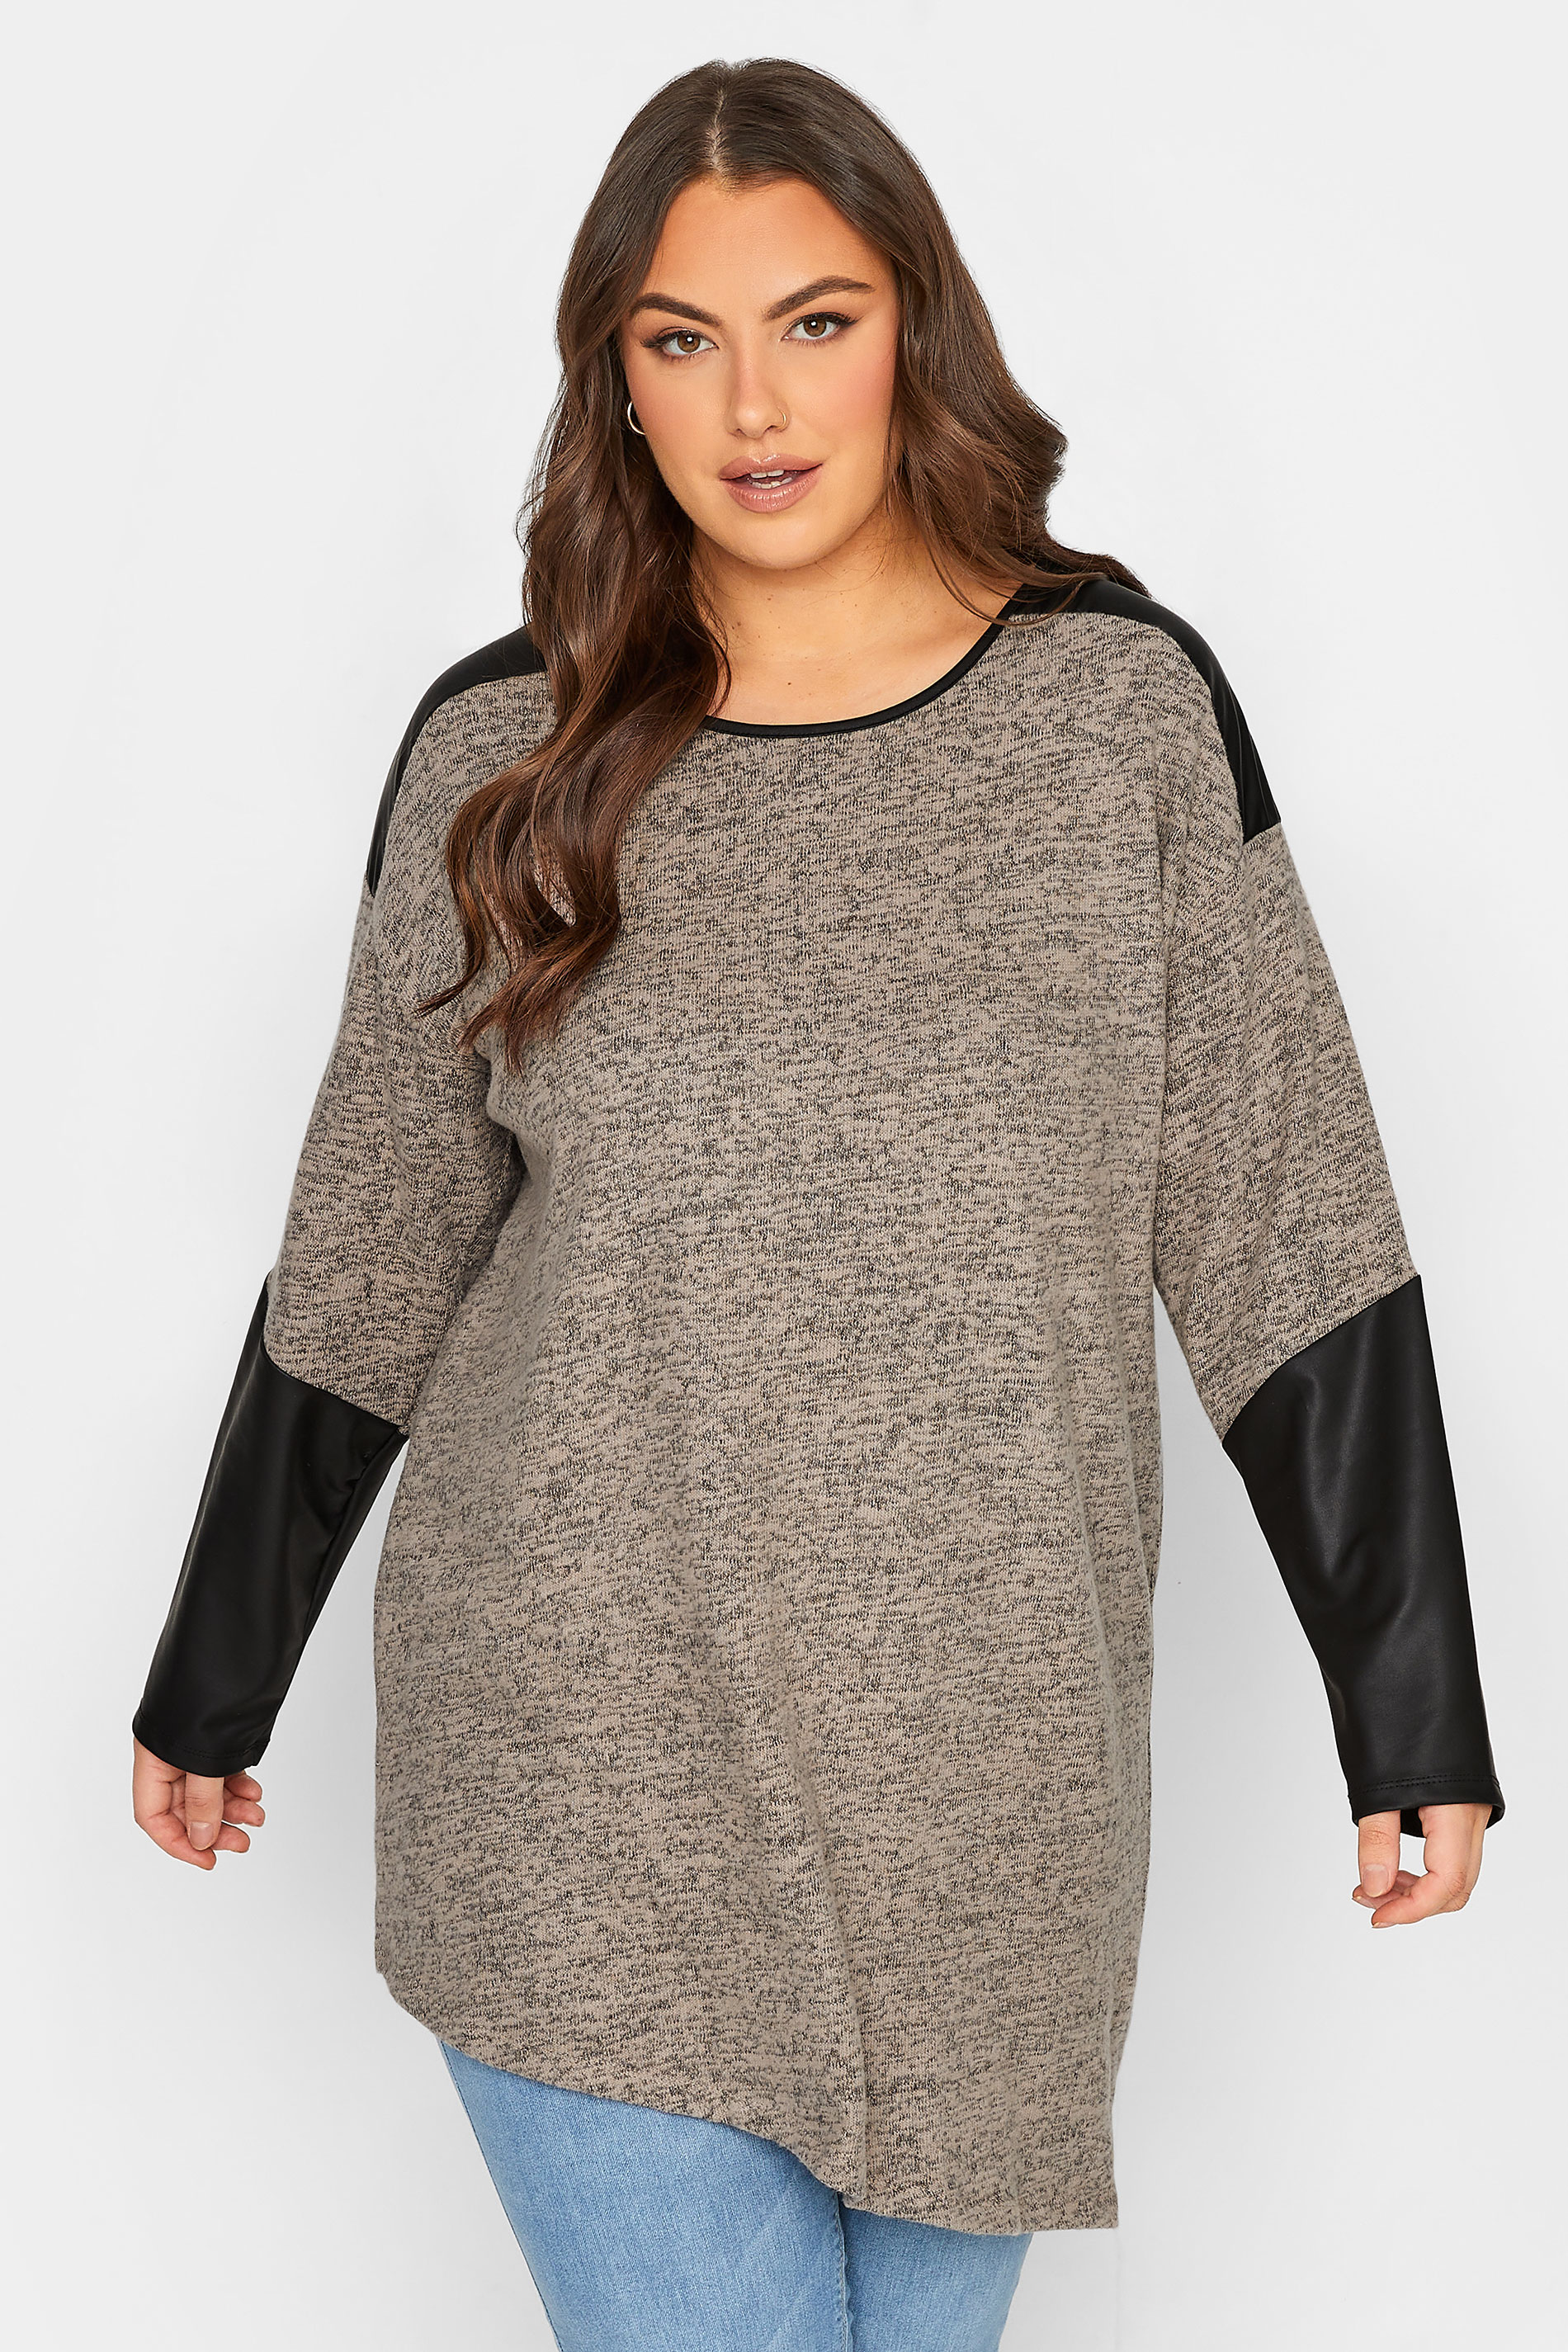 Curve Plus Size Charcoal Grey & Black Soft Touch Faux Leather Top | Yours Clothing 1